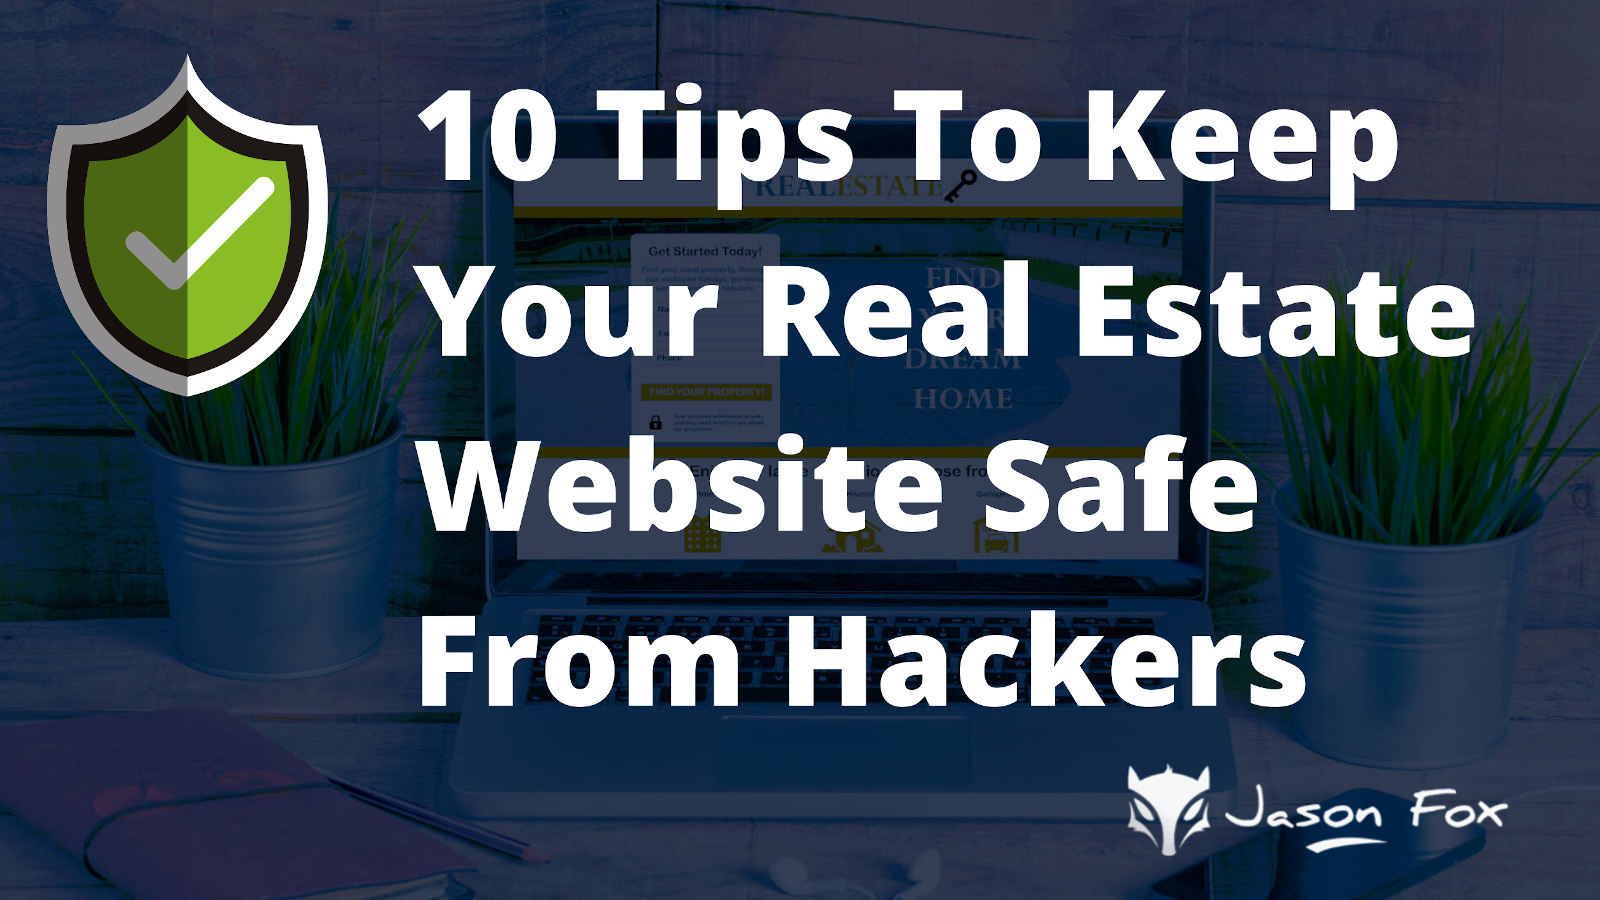 10 Tips To Keep Your Real Estate Website Safe From Hackers